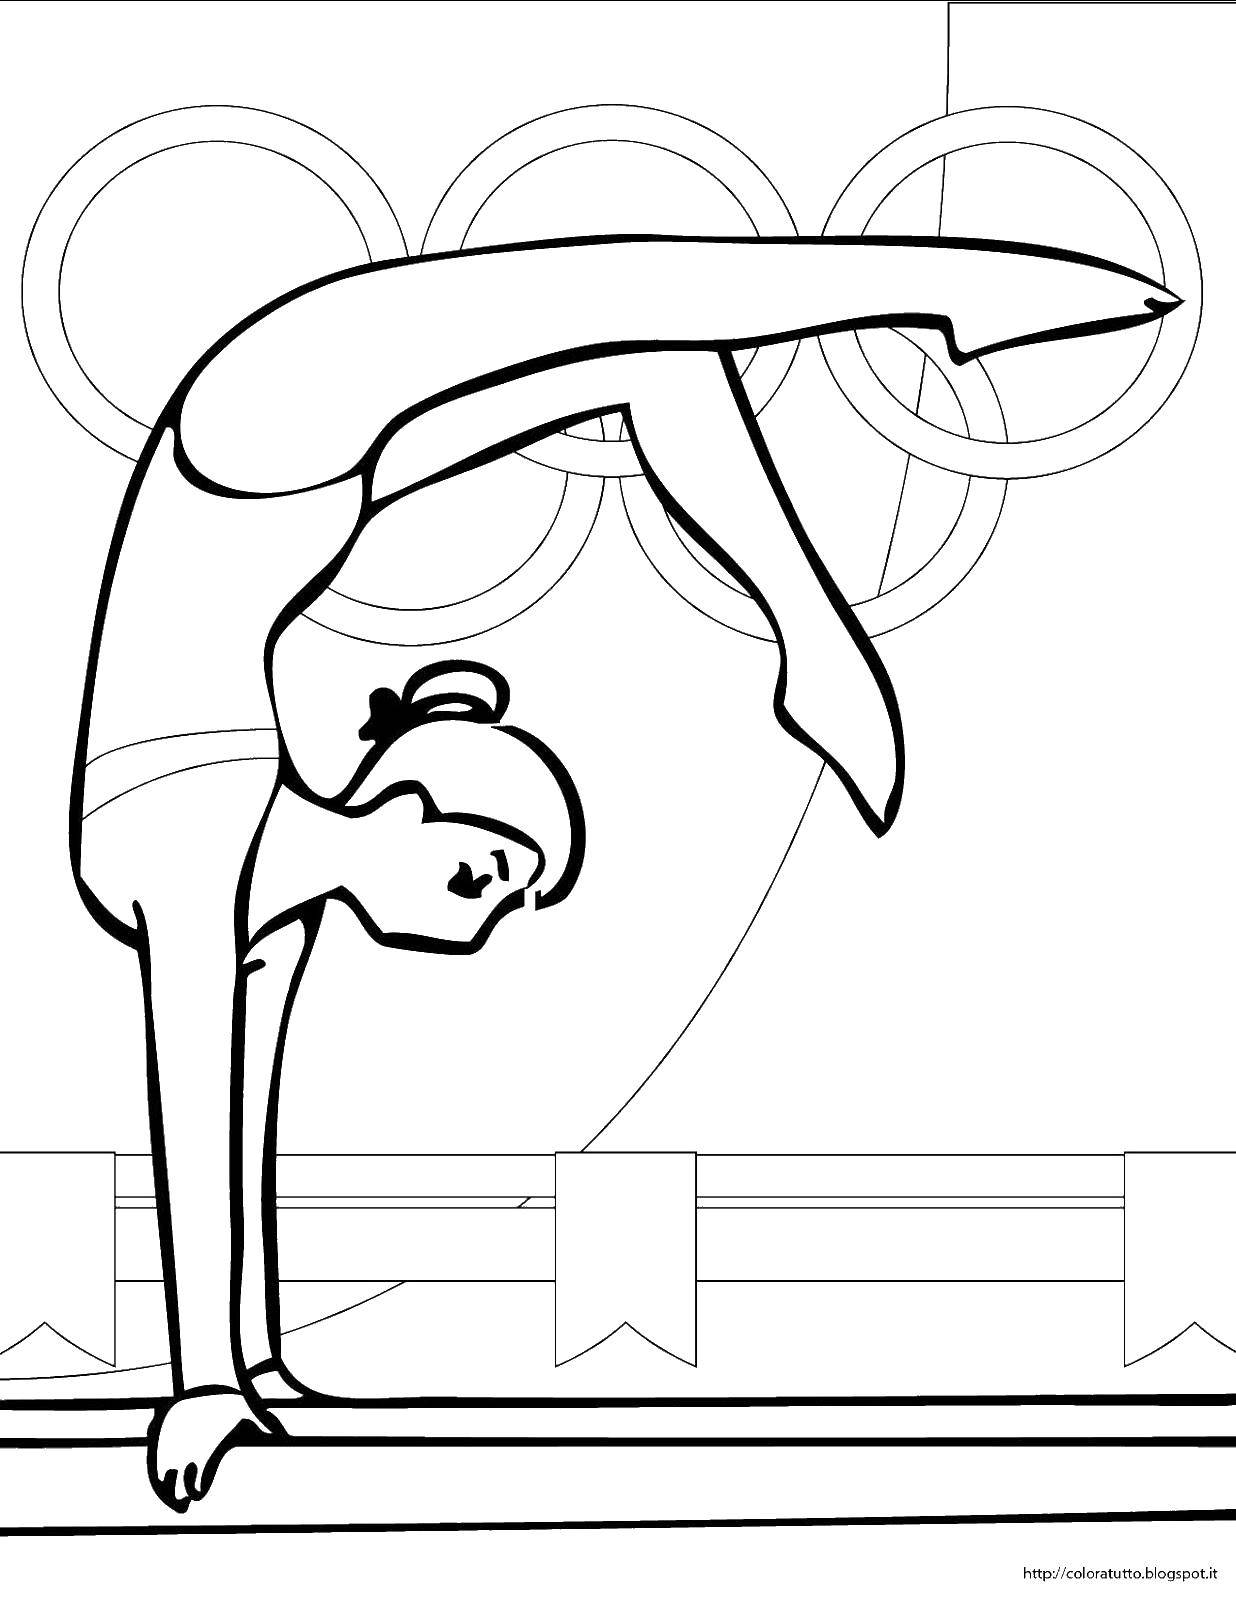 Coloring Gymnast on balance beam. Category gymnastics. Tags:  sports, gymnastics, gymnast, balance beam.